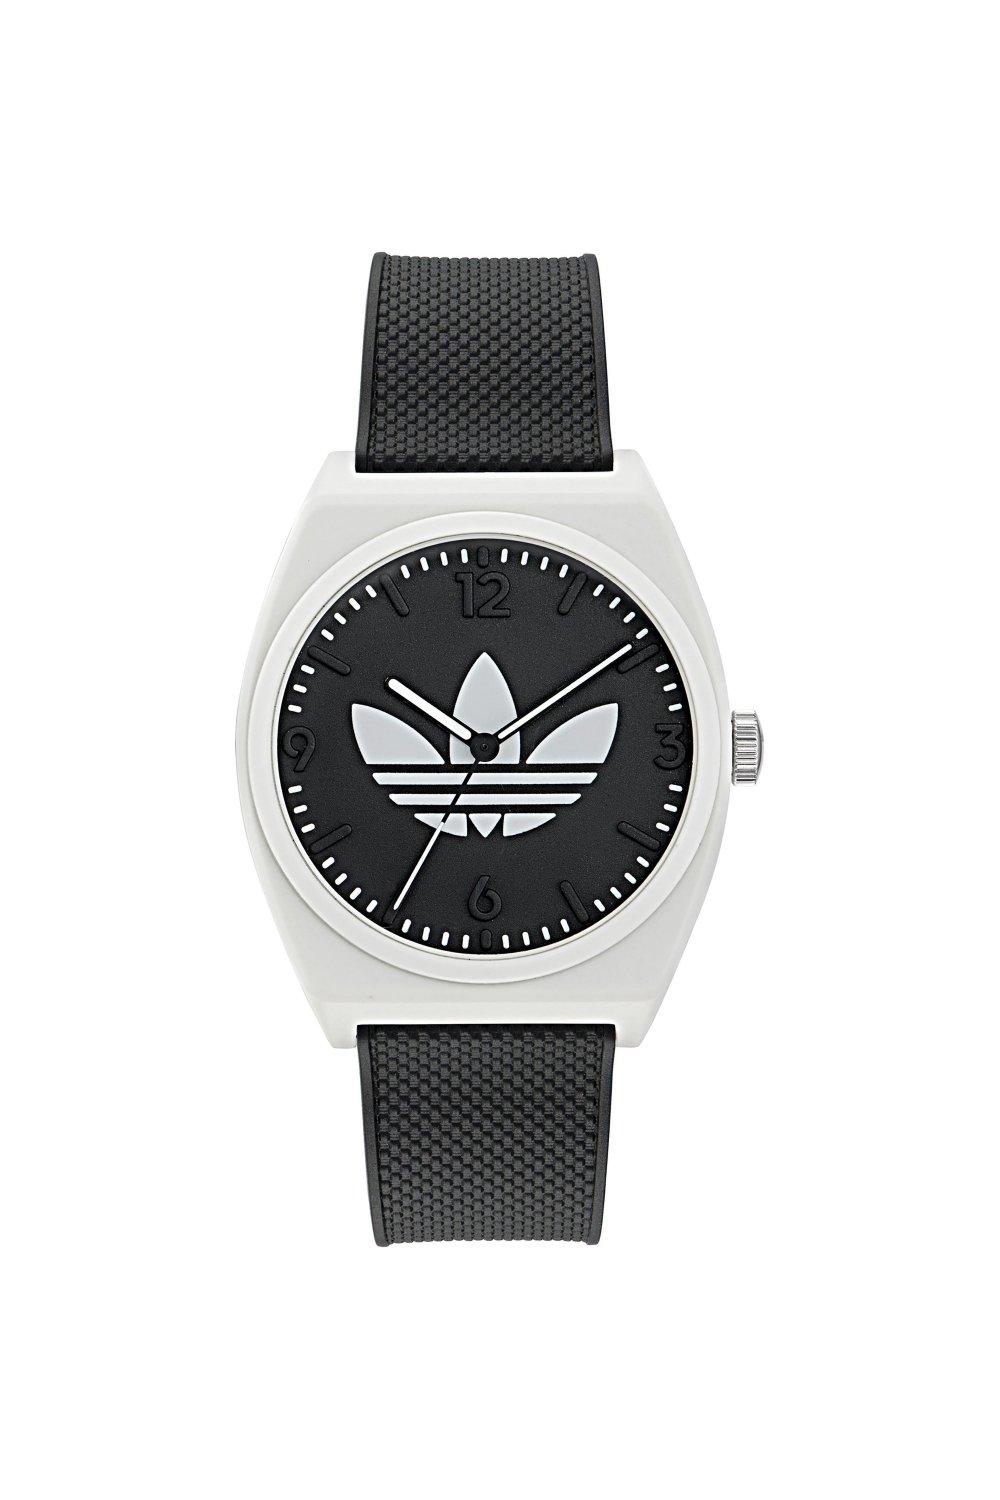 Watches | Project adidas Analogue Originals Aost23550 - Two | Quartz Watch Fashion Plastic/resin